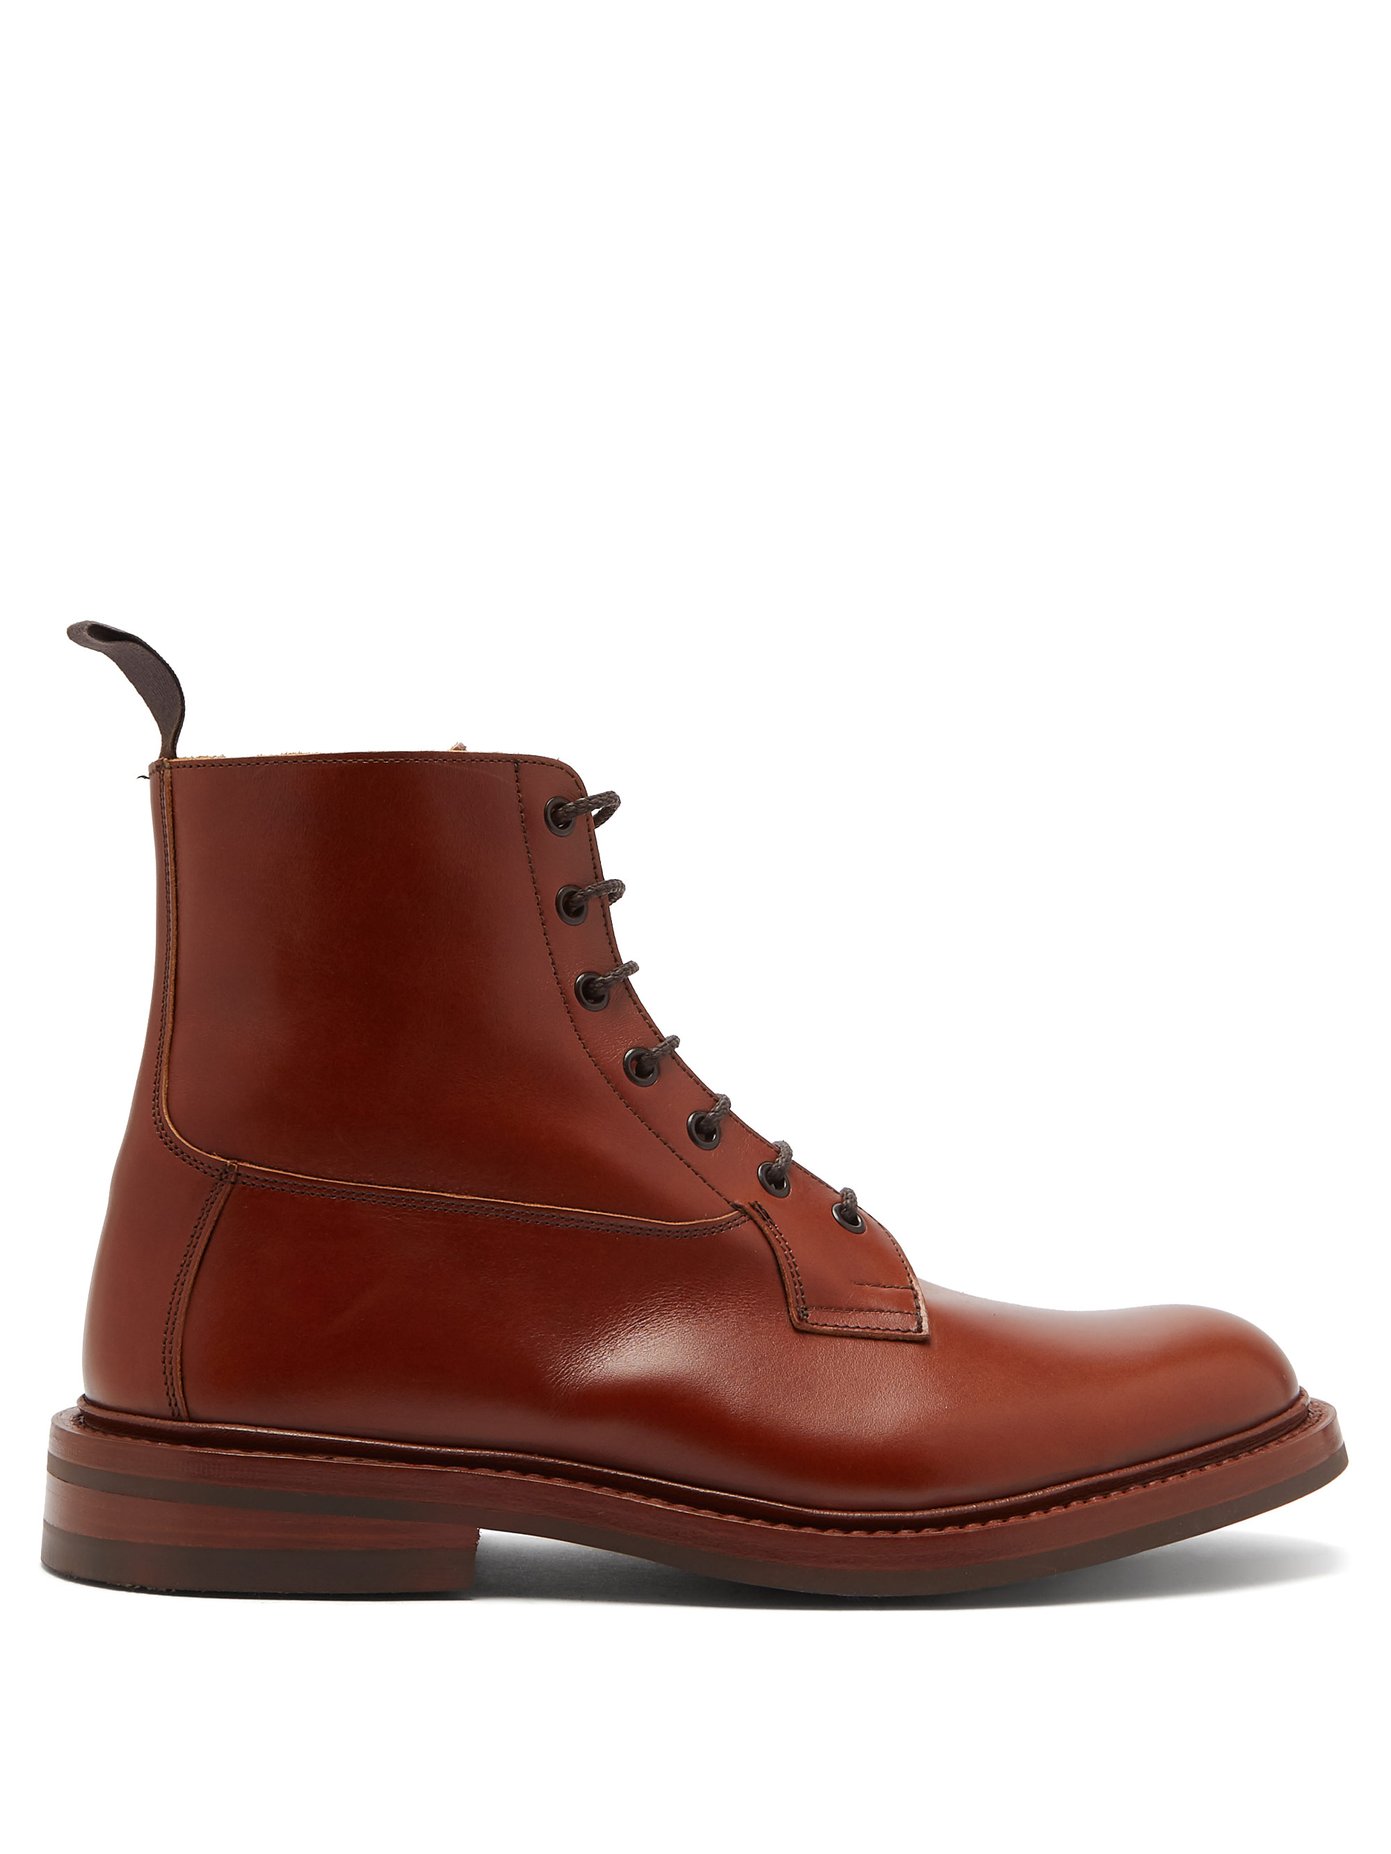 Burford leather derby boots | Tricker's 